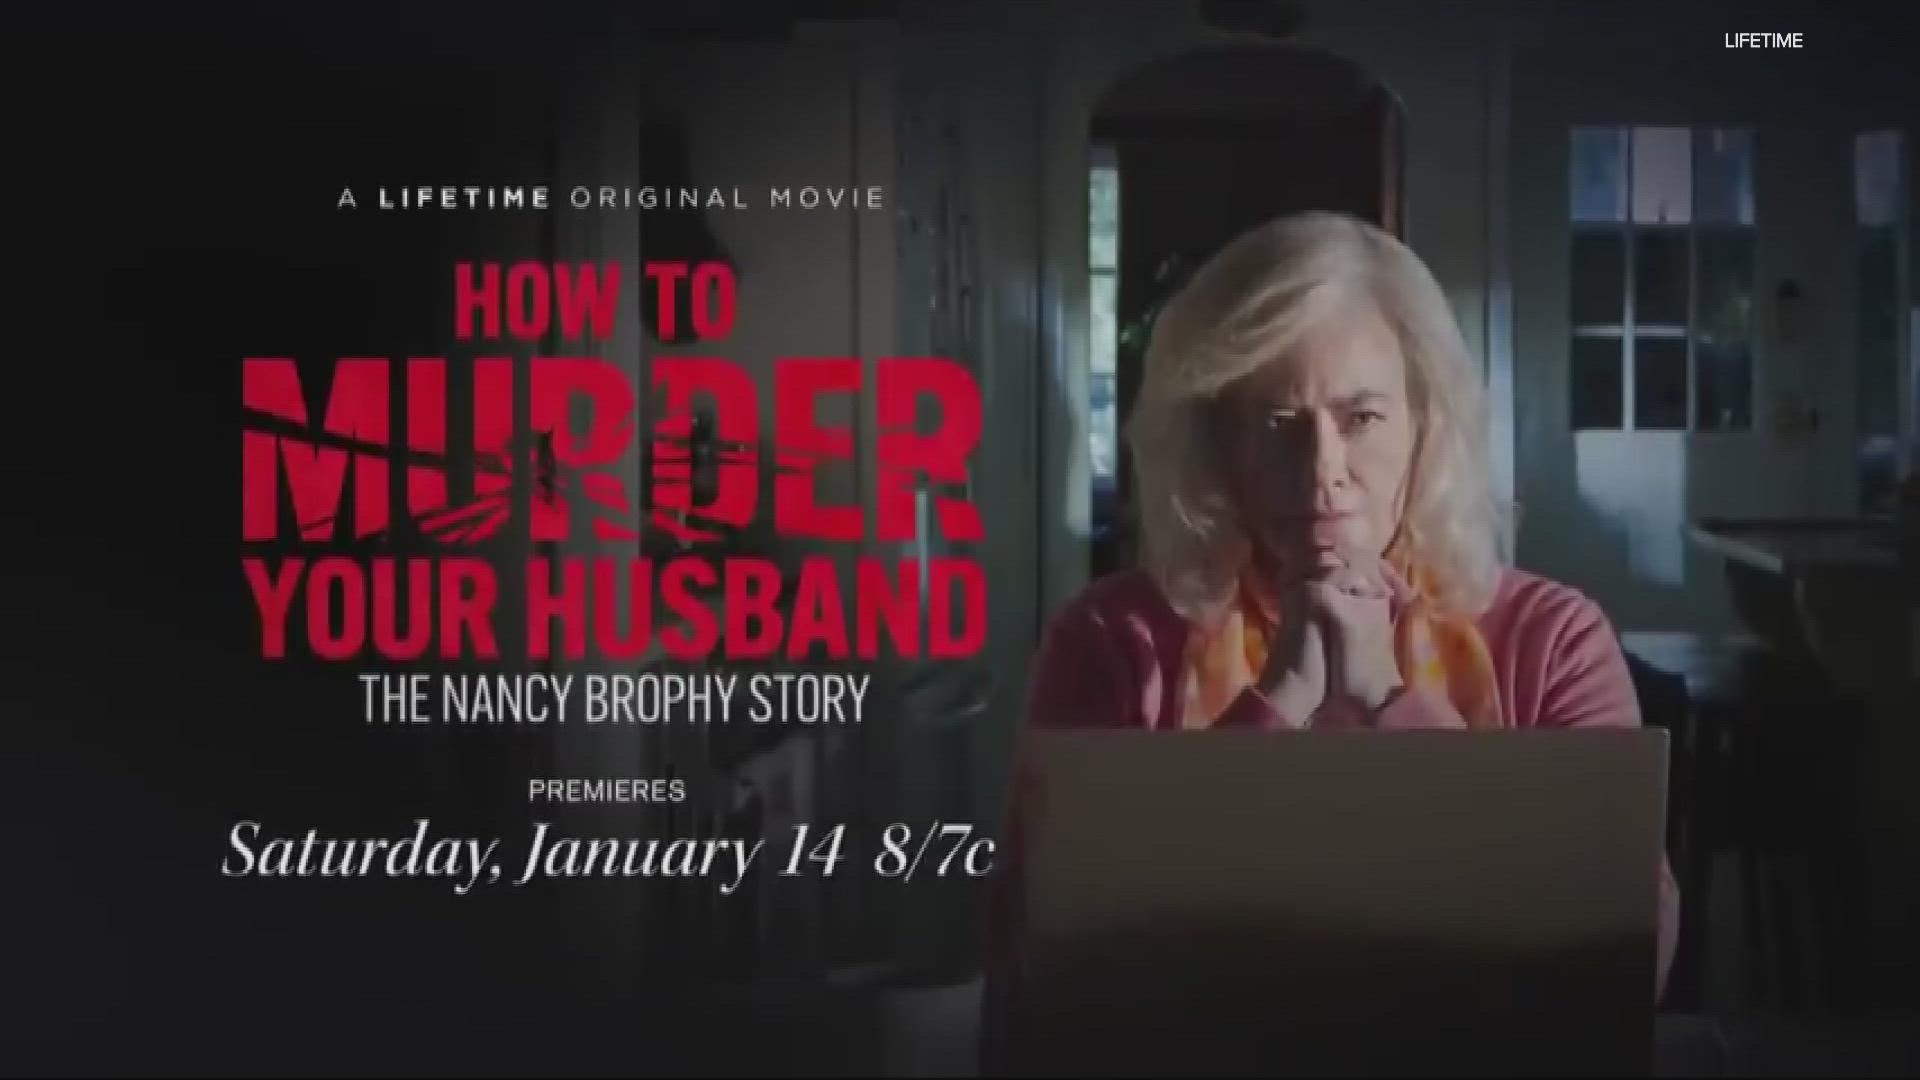 "How to Murder Your Husband: The Nancy Brophy Story" stars Cybill Shepherd and Steve Guttenberg. It airs Saturday, Jan. 14 on Lifetime